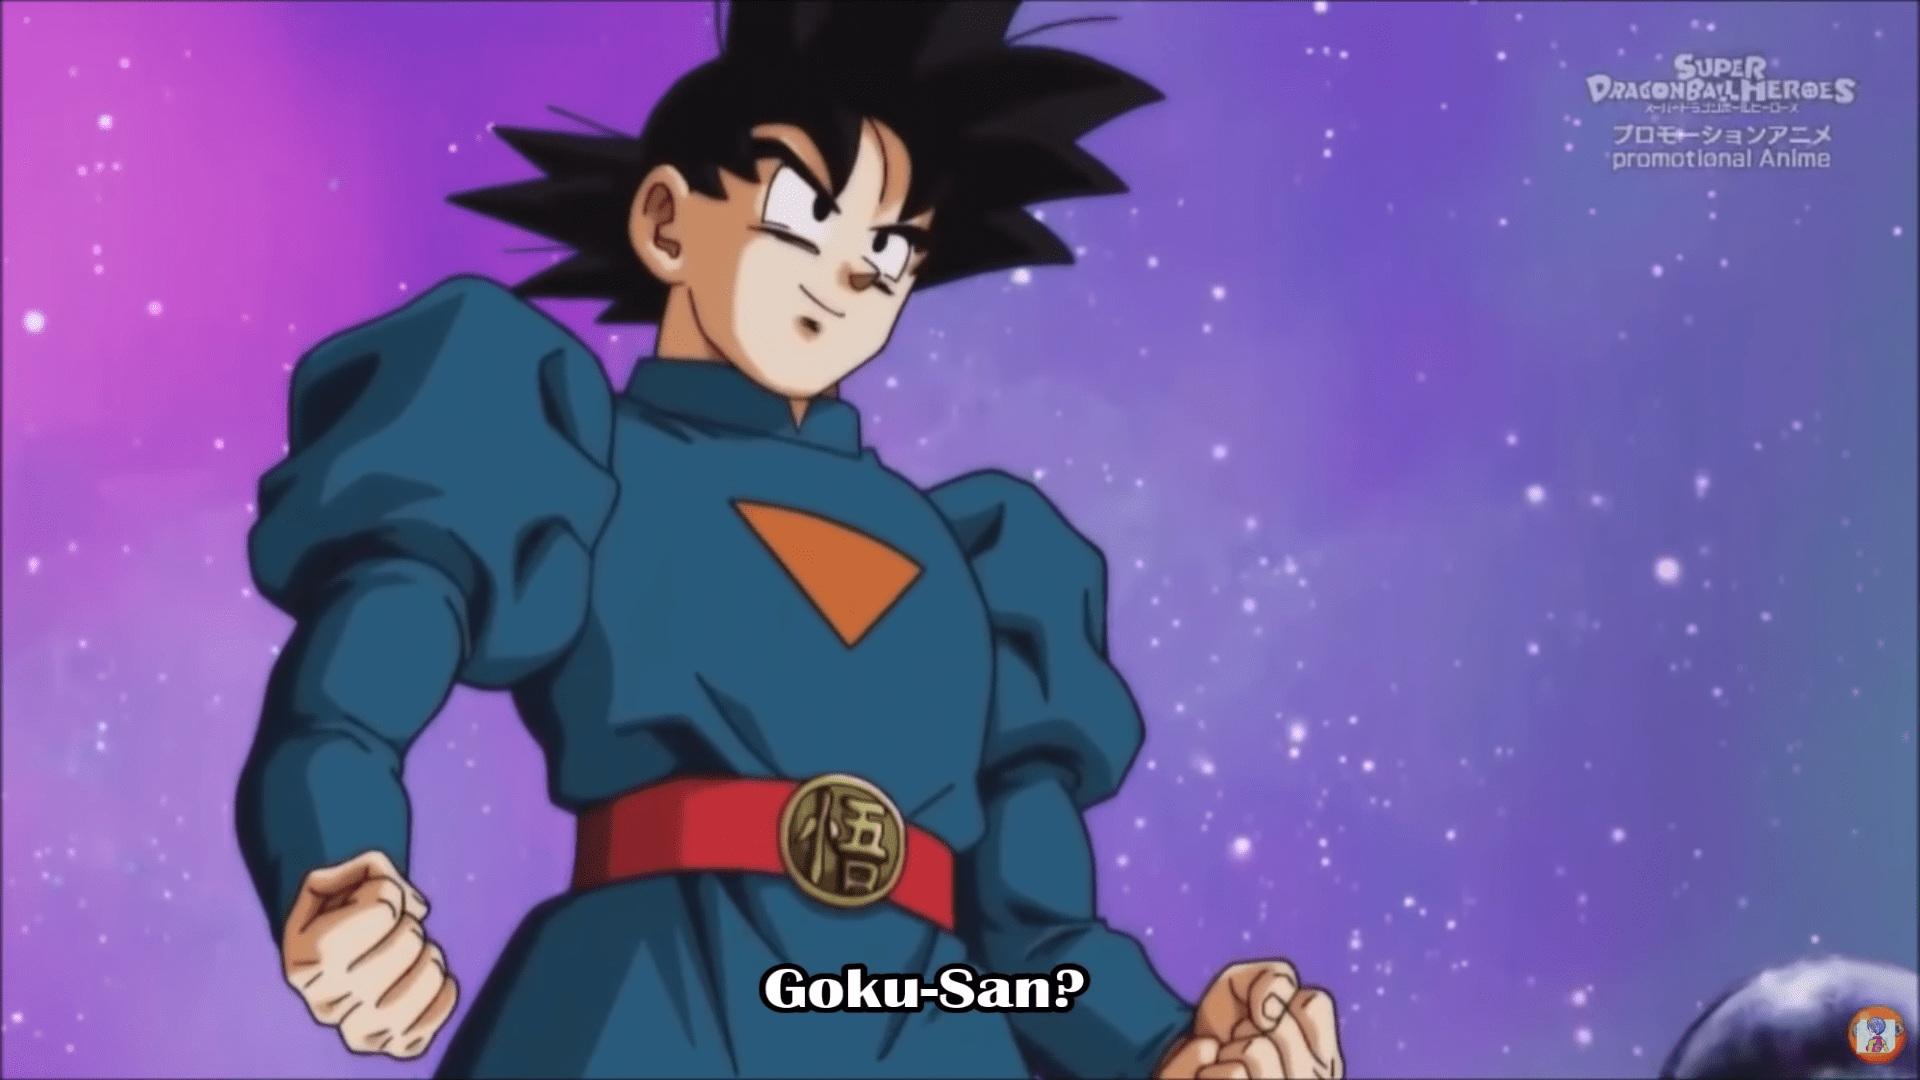 Dragon Ball Heroes Episode 9 will feature Goku Grand Priest Avatar